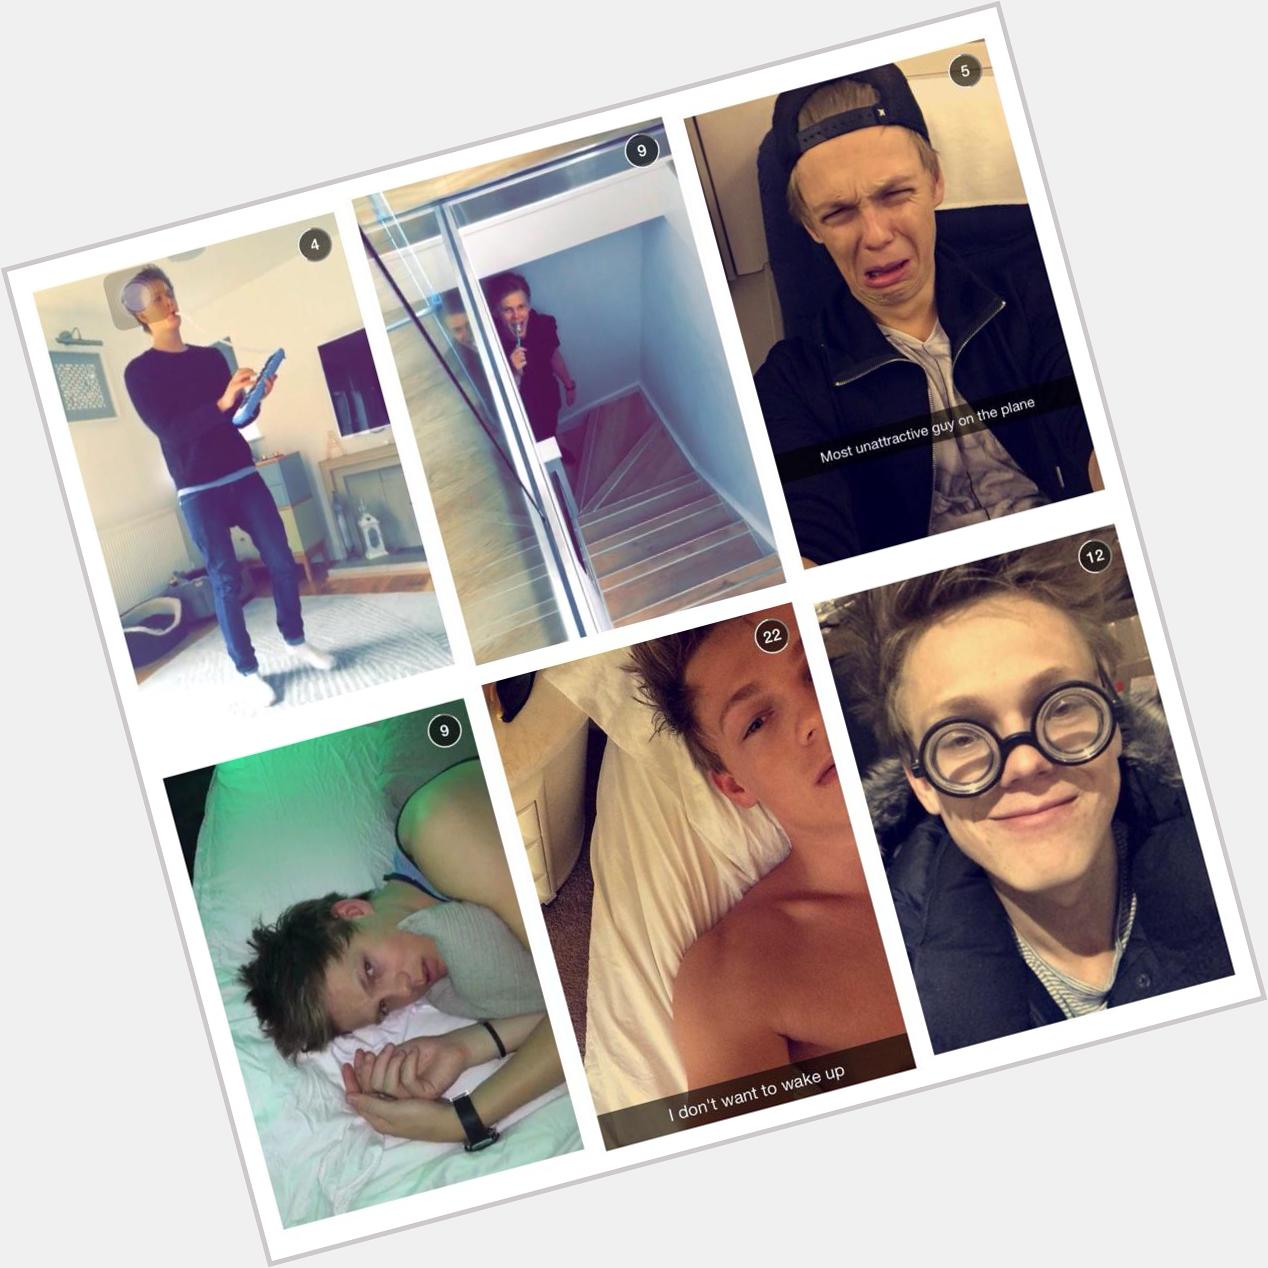  happy birthday to the best youtuber ever   love u millions never fail to make me smile have a gr8 day 